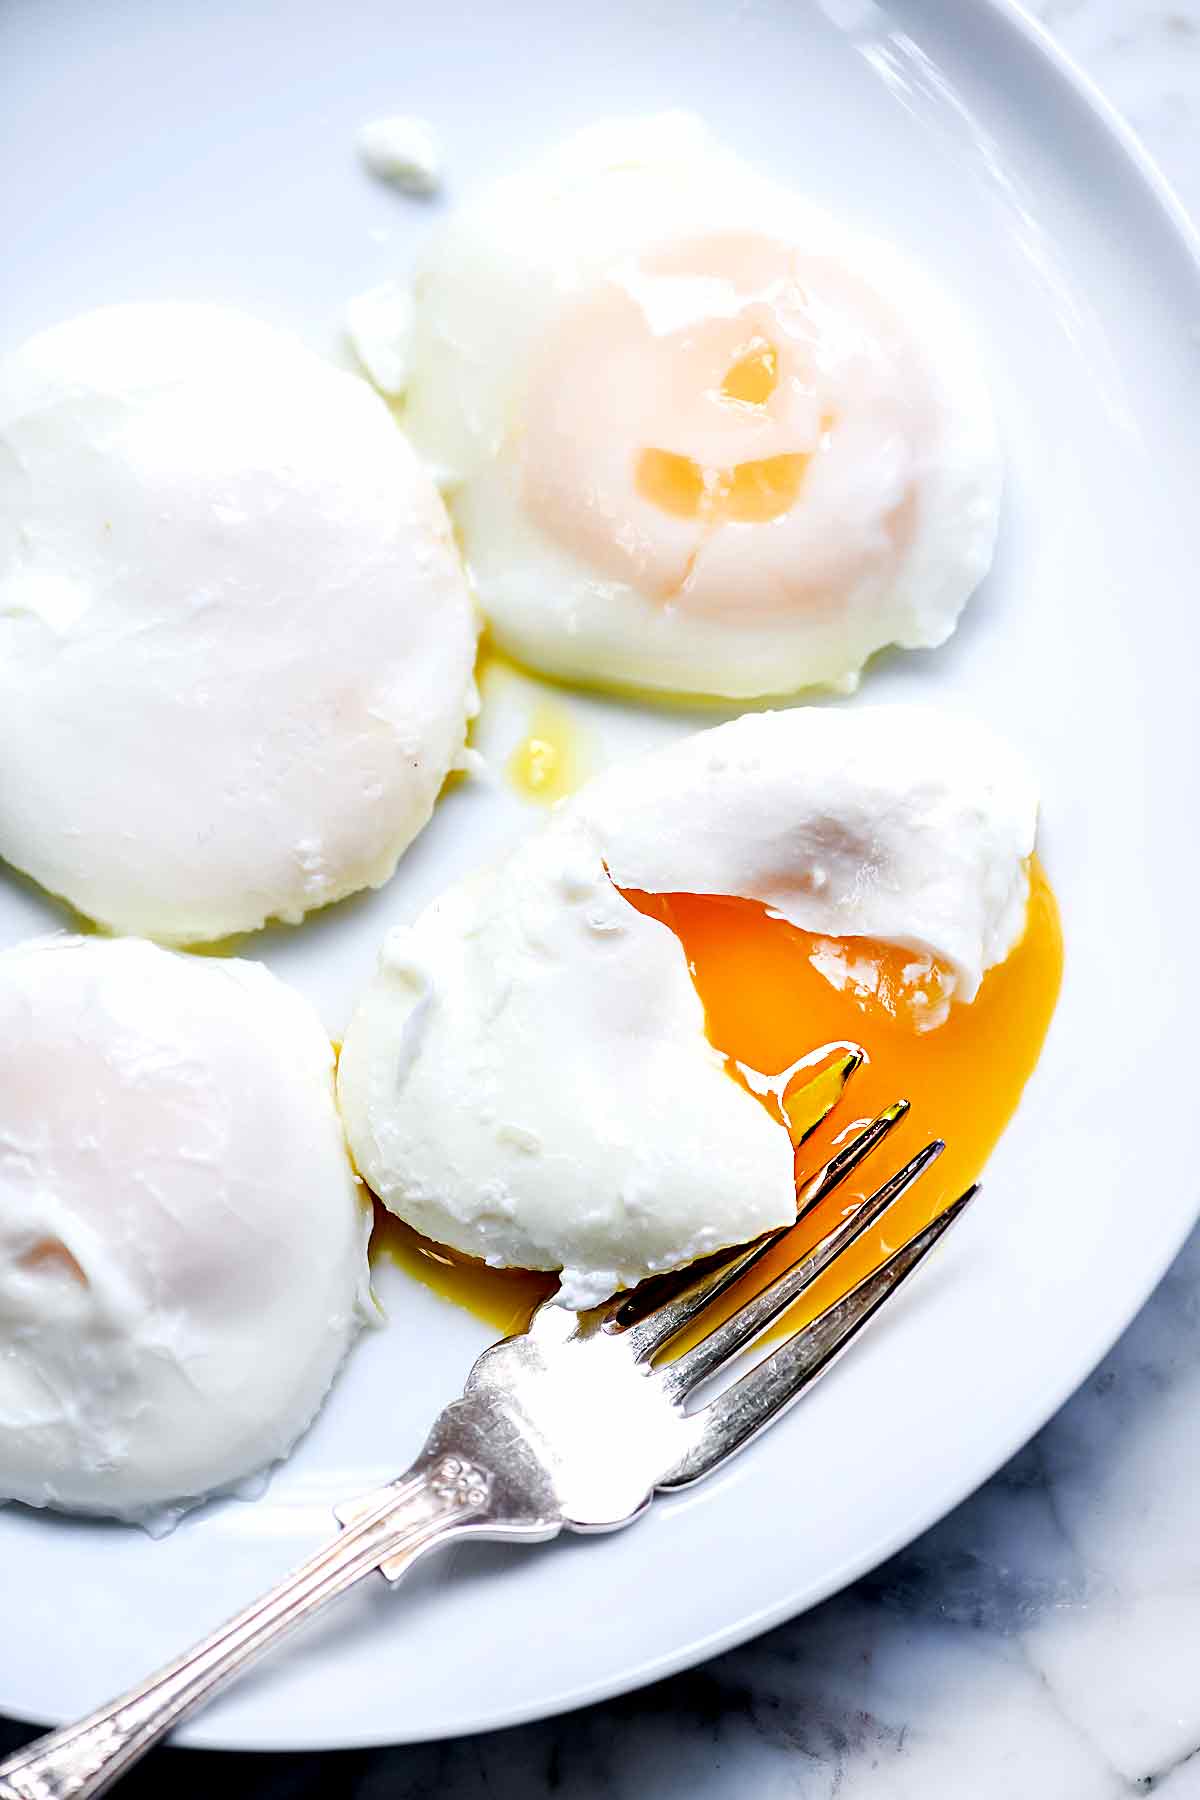 The Perfect Poached Egg in 5 Easy Steps